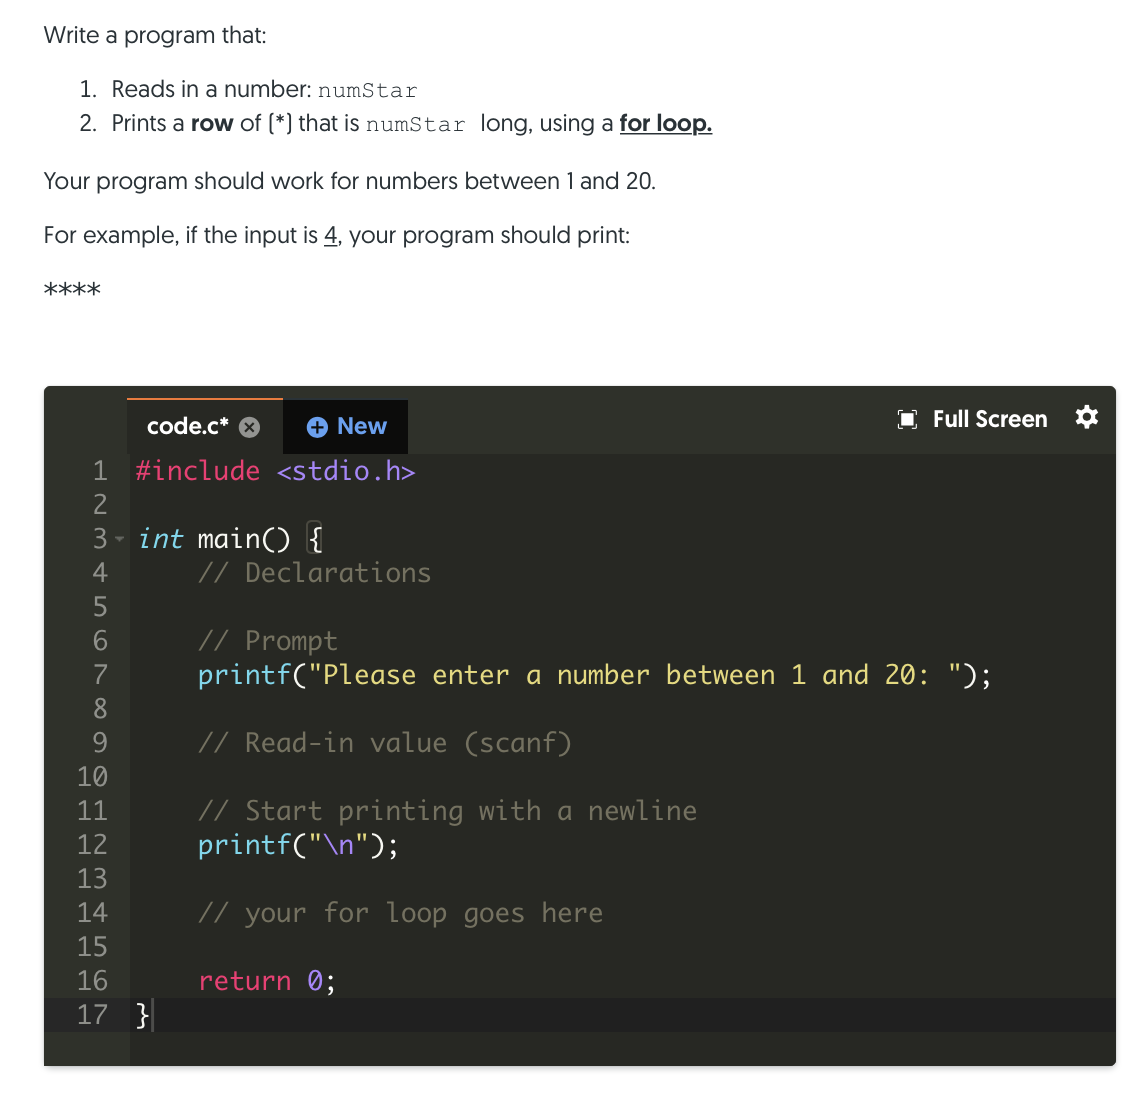 Write a program that:
1. Reads in a number: numStar
2. Prints a row of (*) that is numStar long, using a for loop.
Your program should work for numbers between 1 and 20.
For example, if the input is 4, your program should print:
****
code.c*
+ New
Full Screen *
1 #include <stdio.h>
3 - int main() {
4
// Declarations
5
// Prompt
printf("Please enter a number between 1 and 20: ");
6.
7
8
9.
// Read-in value (scanf)
10
// Start printing with a newline
printf("\n");
11
12
13
14
// your for loop goes here
15
16
return 0;
17 }
